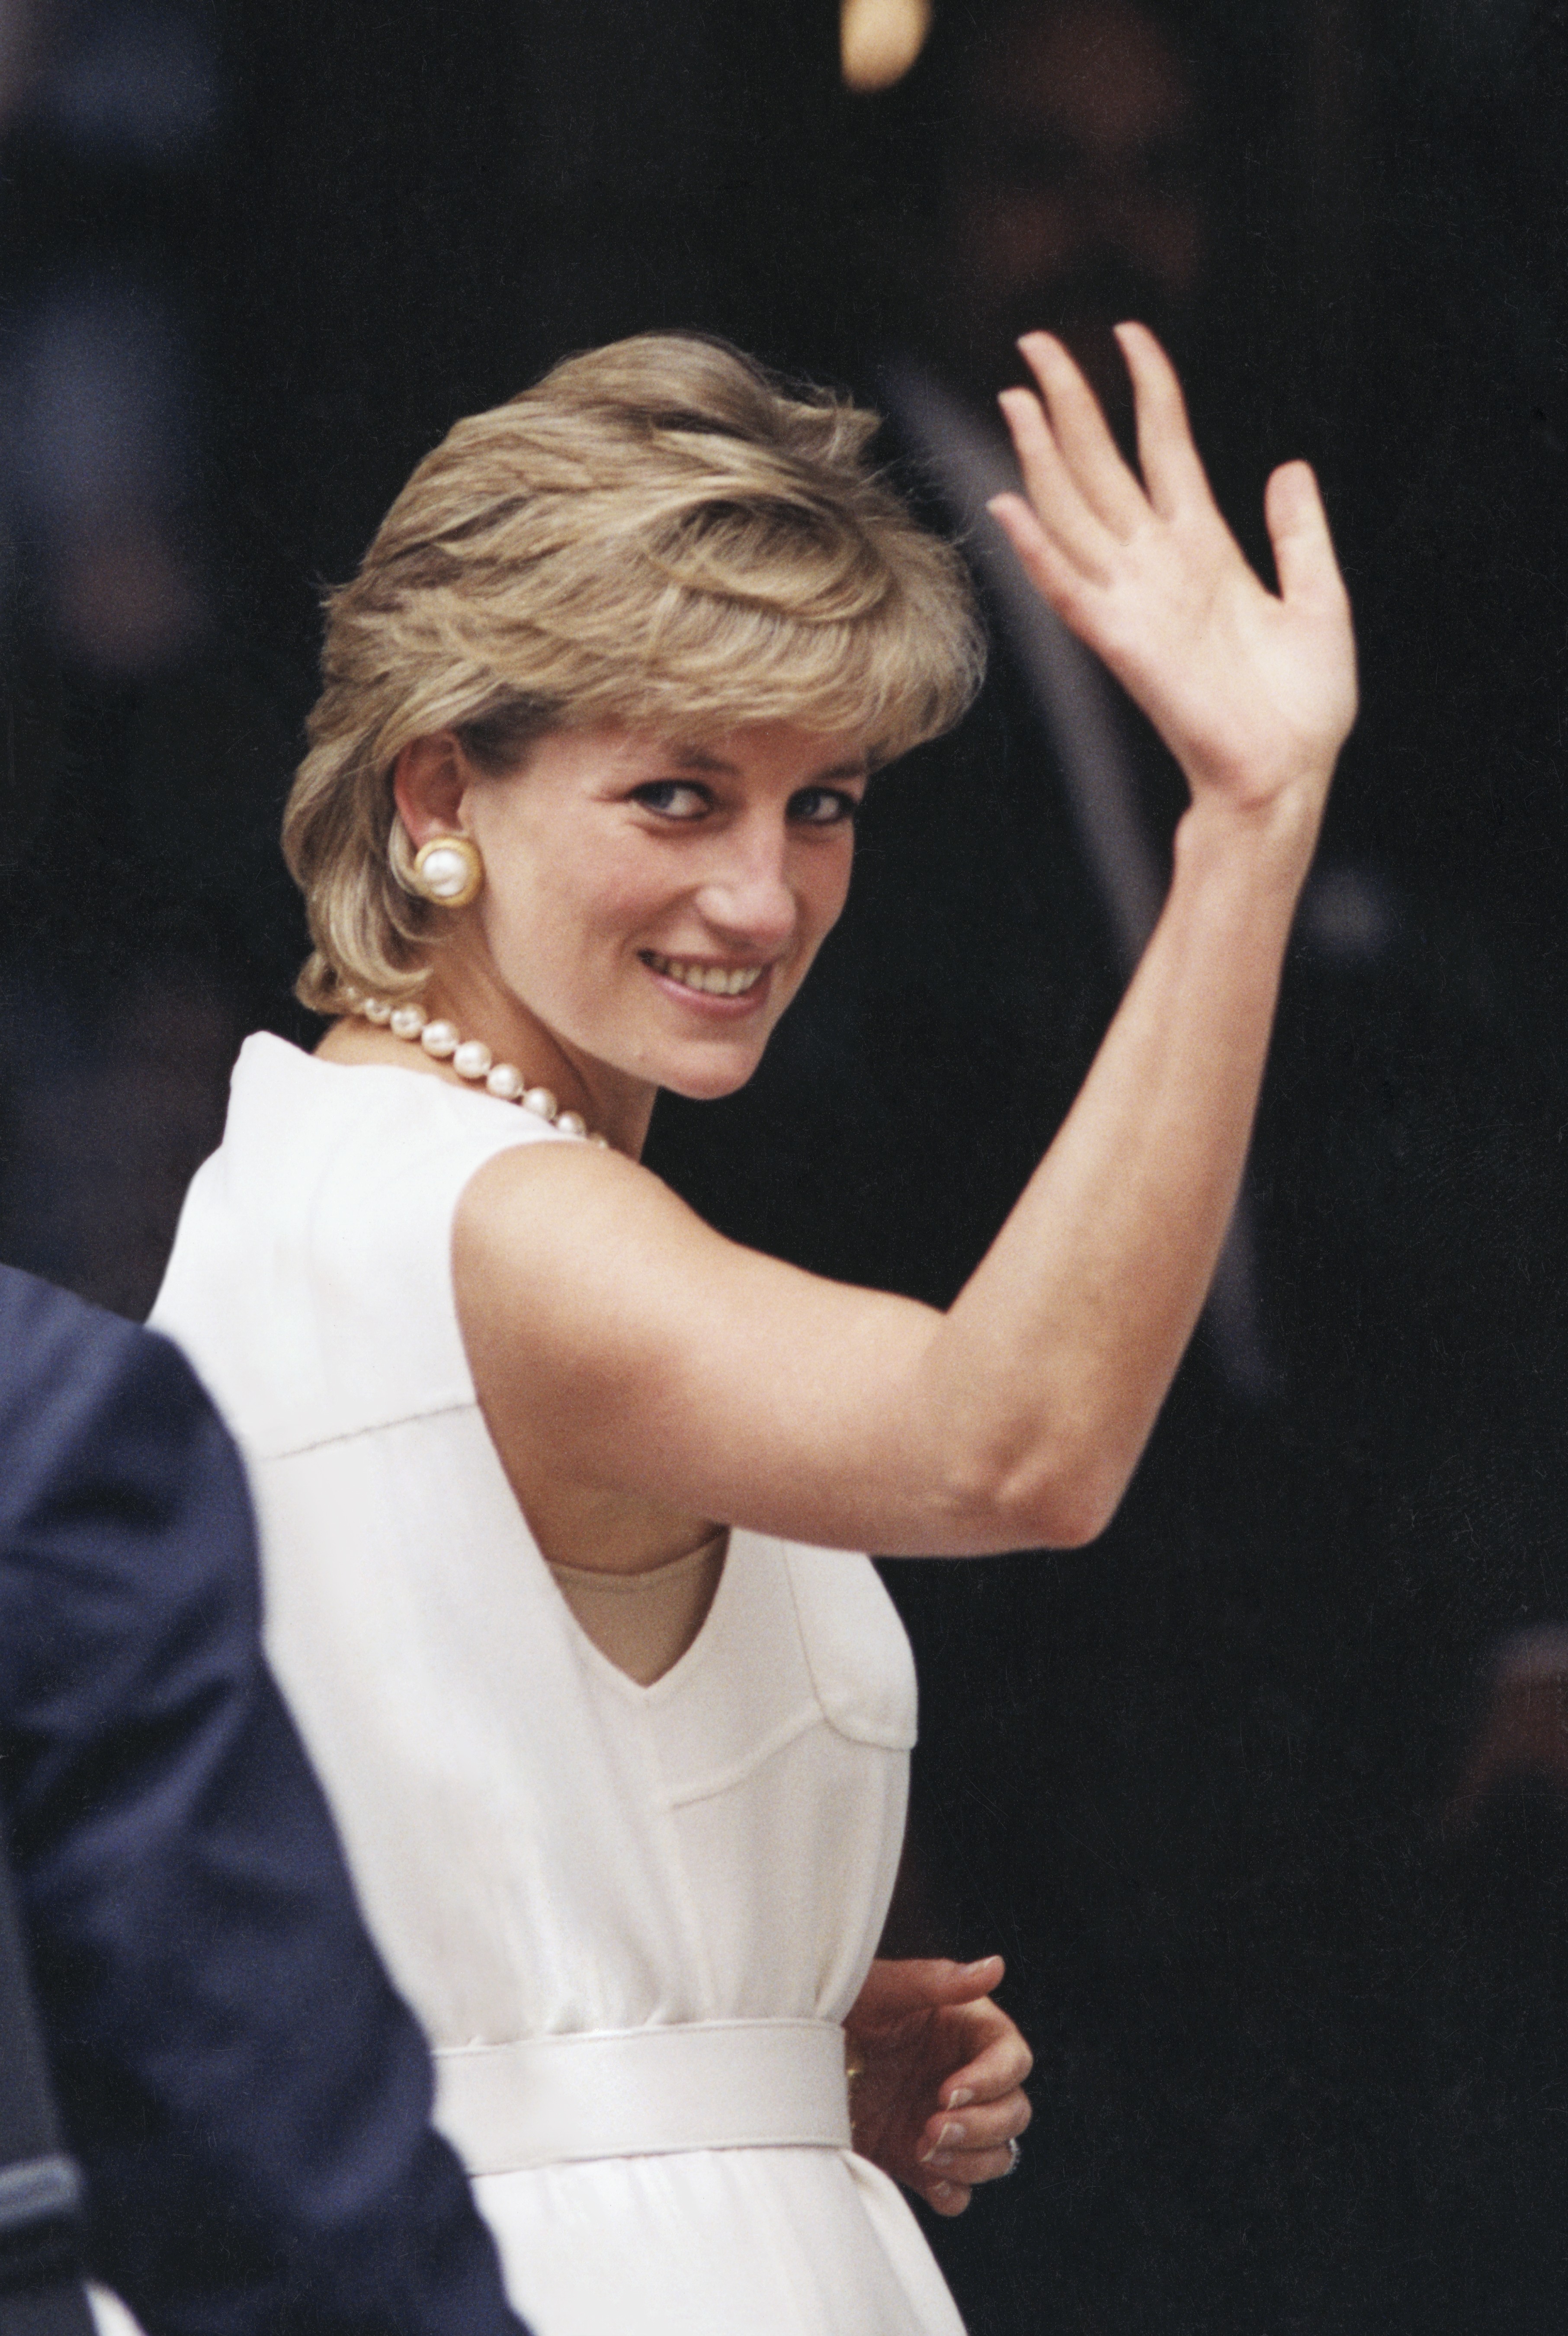 CHICAGO, UNITED STATES - JUNE 06:  (NOT FOR USE ON MAGAZINE COVER IN THE USA BEFORE 15 JUNE 2007) On The Last Day Of Her Visit To Chicago Princess Diana Waves To Enthusiastic Crowd.  (Photo by Tim Graham Photo Library via Getty Images) (Foto: Tim Graham Photo Library via Get)